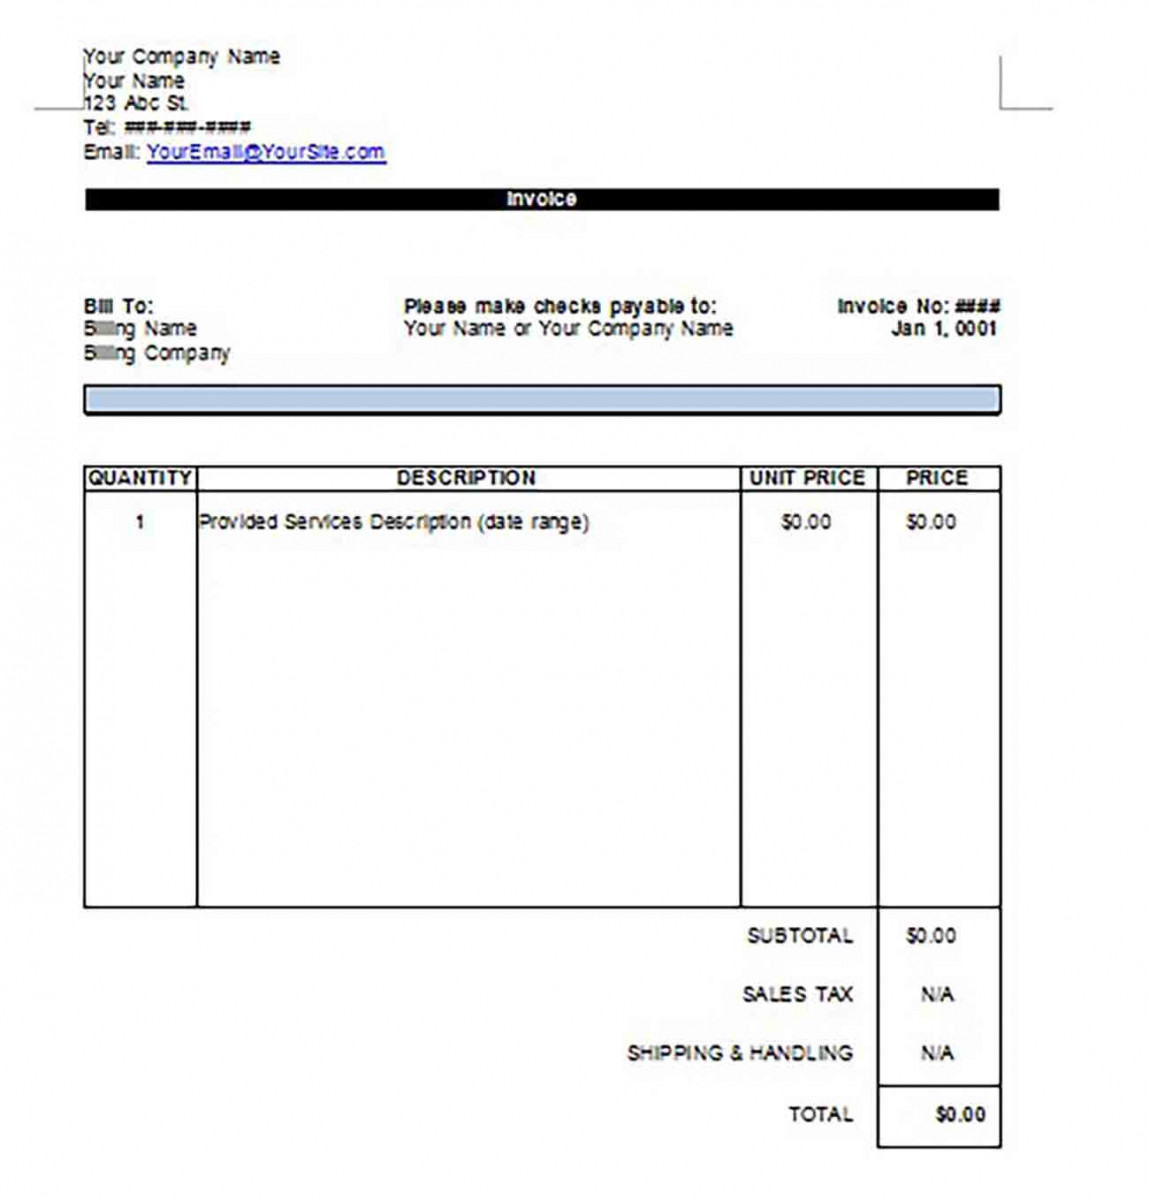 Invoice Template Google Docs And How To Make It Better And Impressive To Read